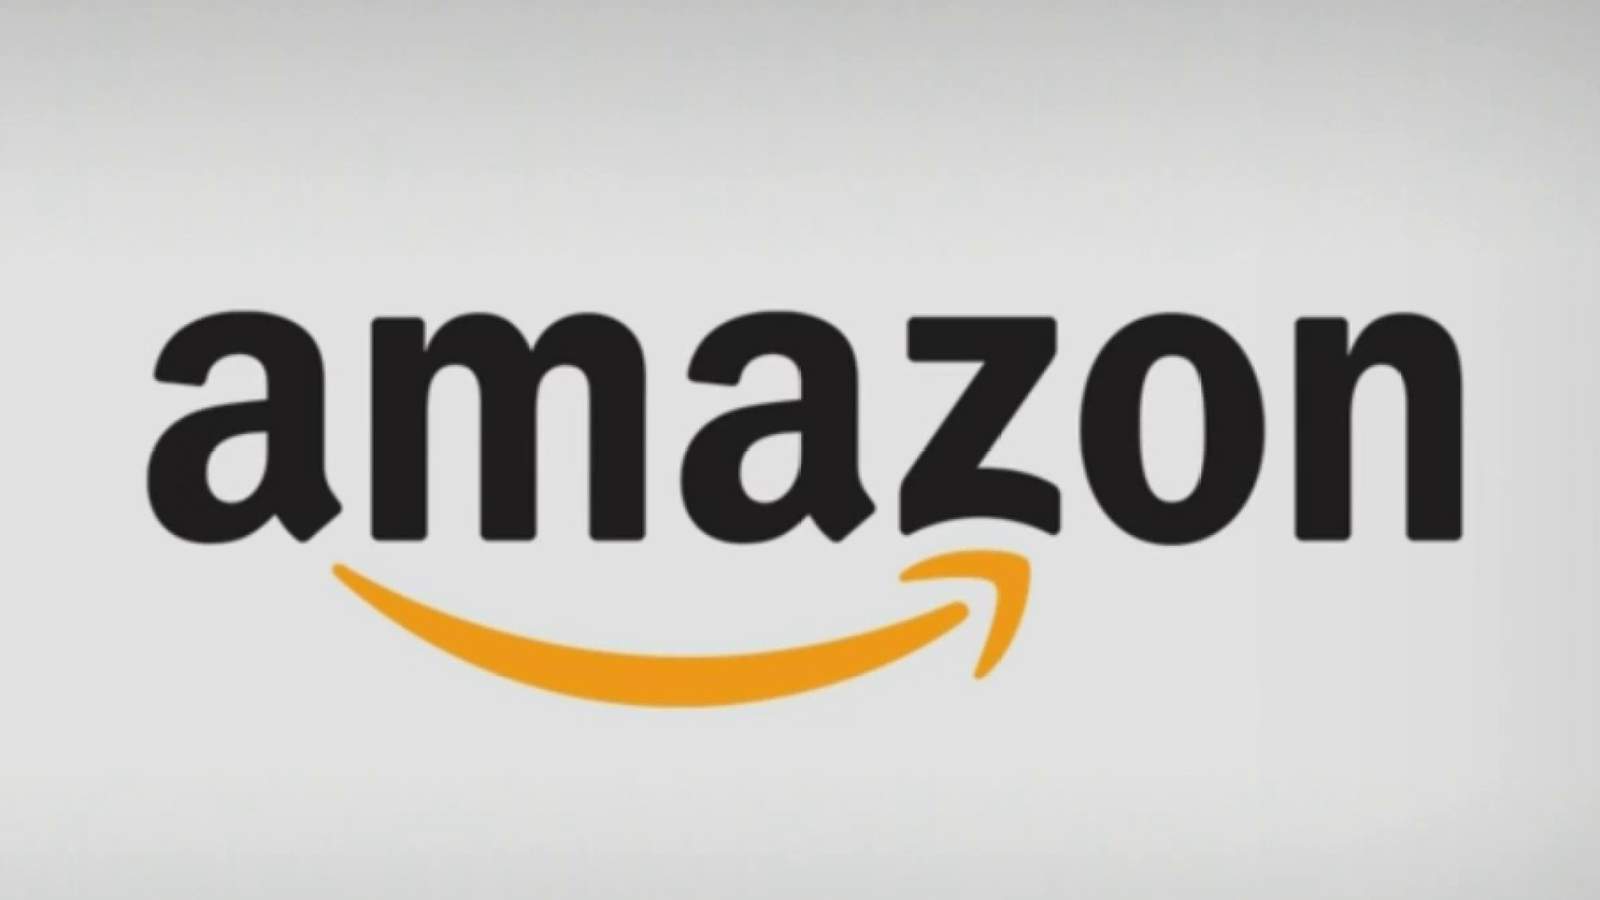 Amazon Prime Day scheduled for Oct. 13-14, 2020